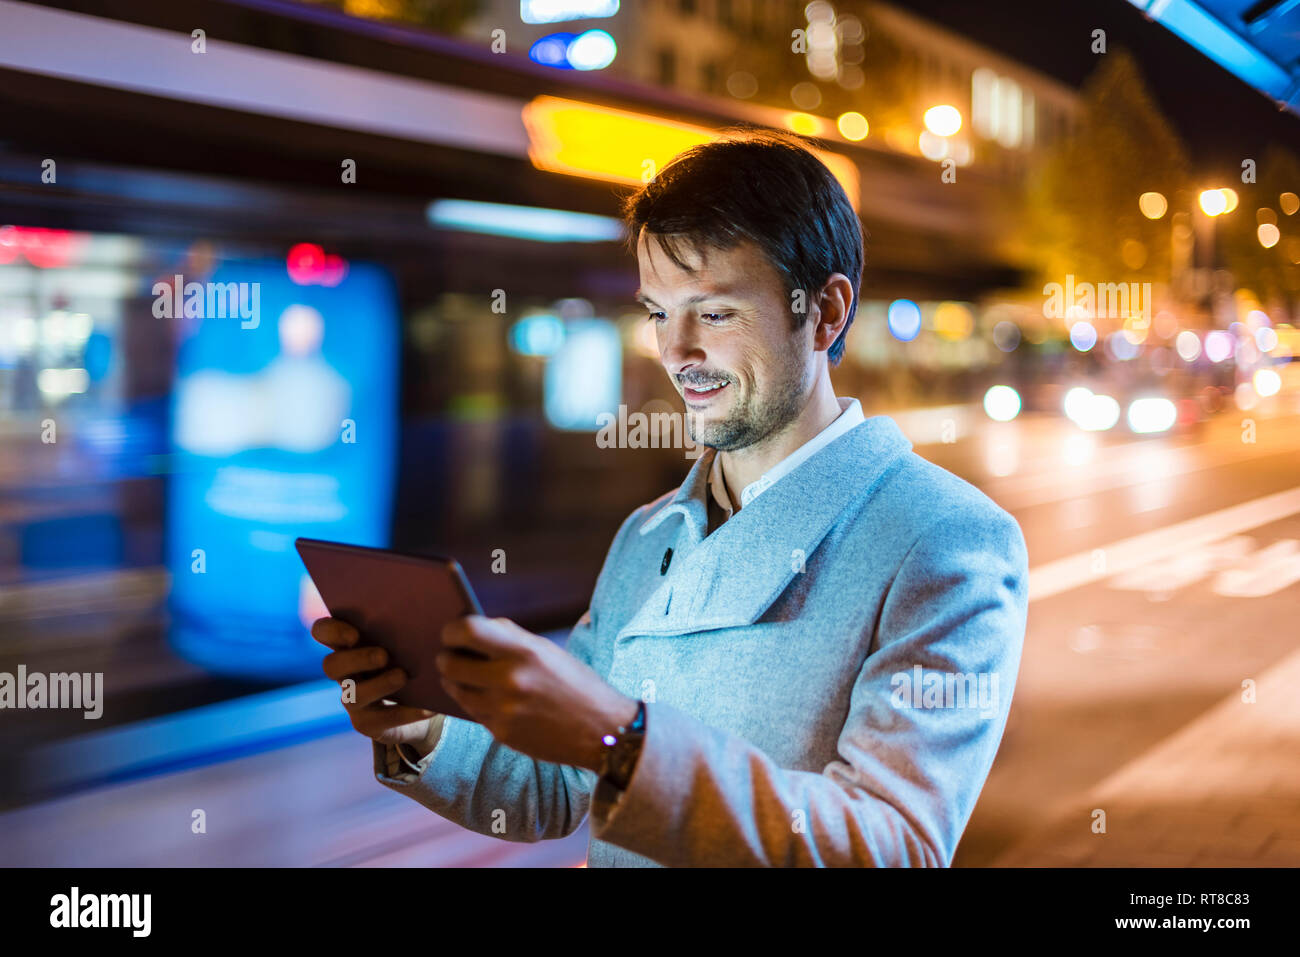 Businessman with digital tablet standing at a bus stop at night Stock Photo